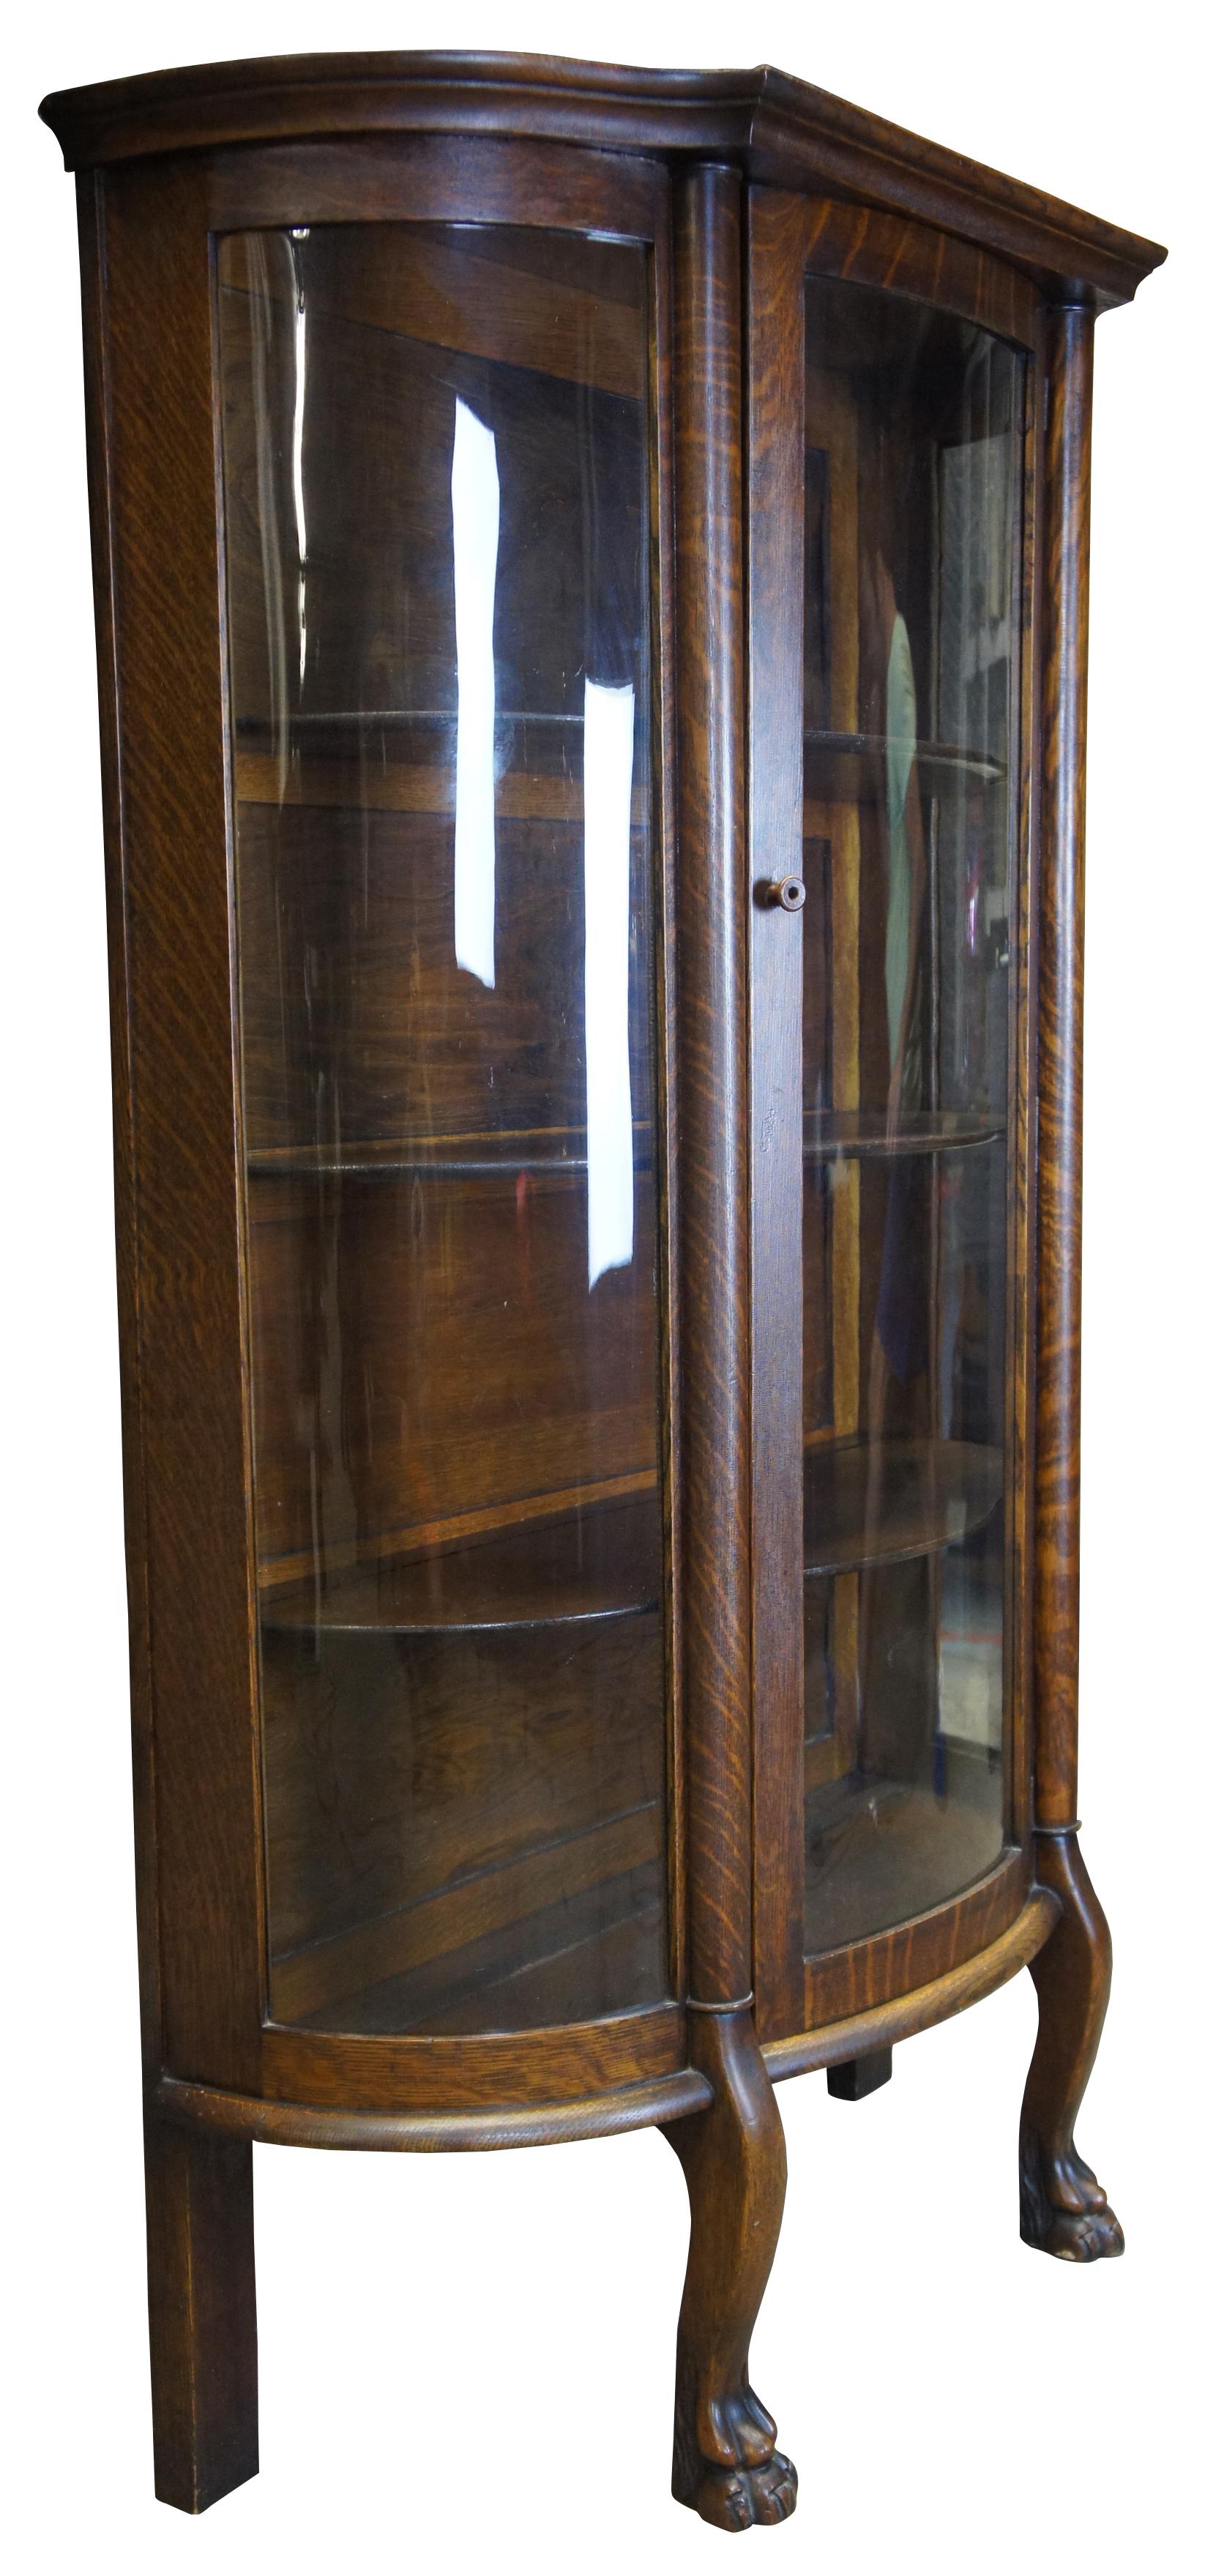 American Empire curved glass curio cabinet. Made from quartersawn oak with circular columns along the front leading to lion paw feet. Includes four shelves and plate groves.
   
Shelf clearance from bottom to top - 12.5